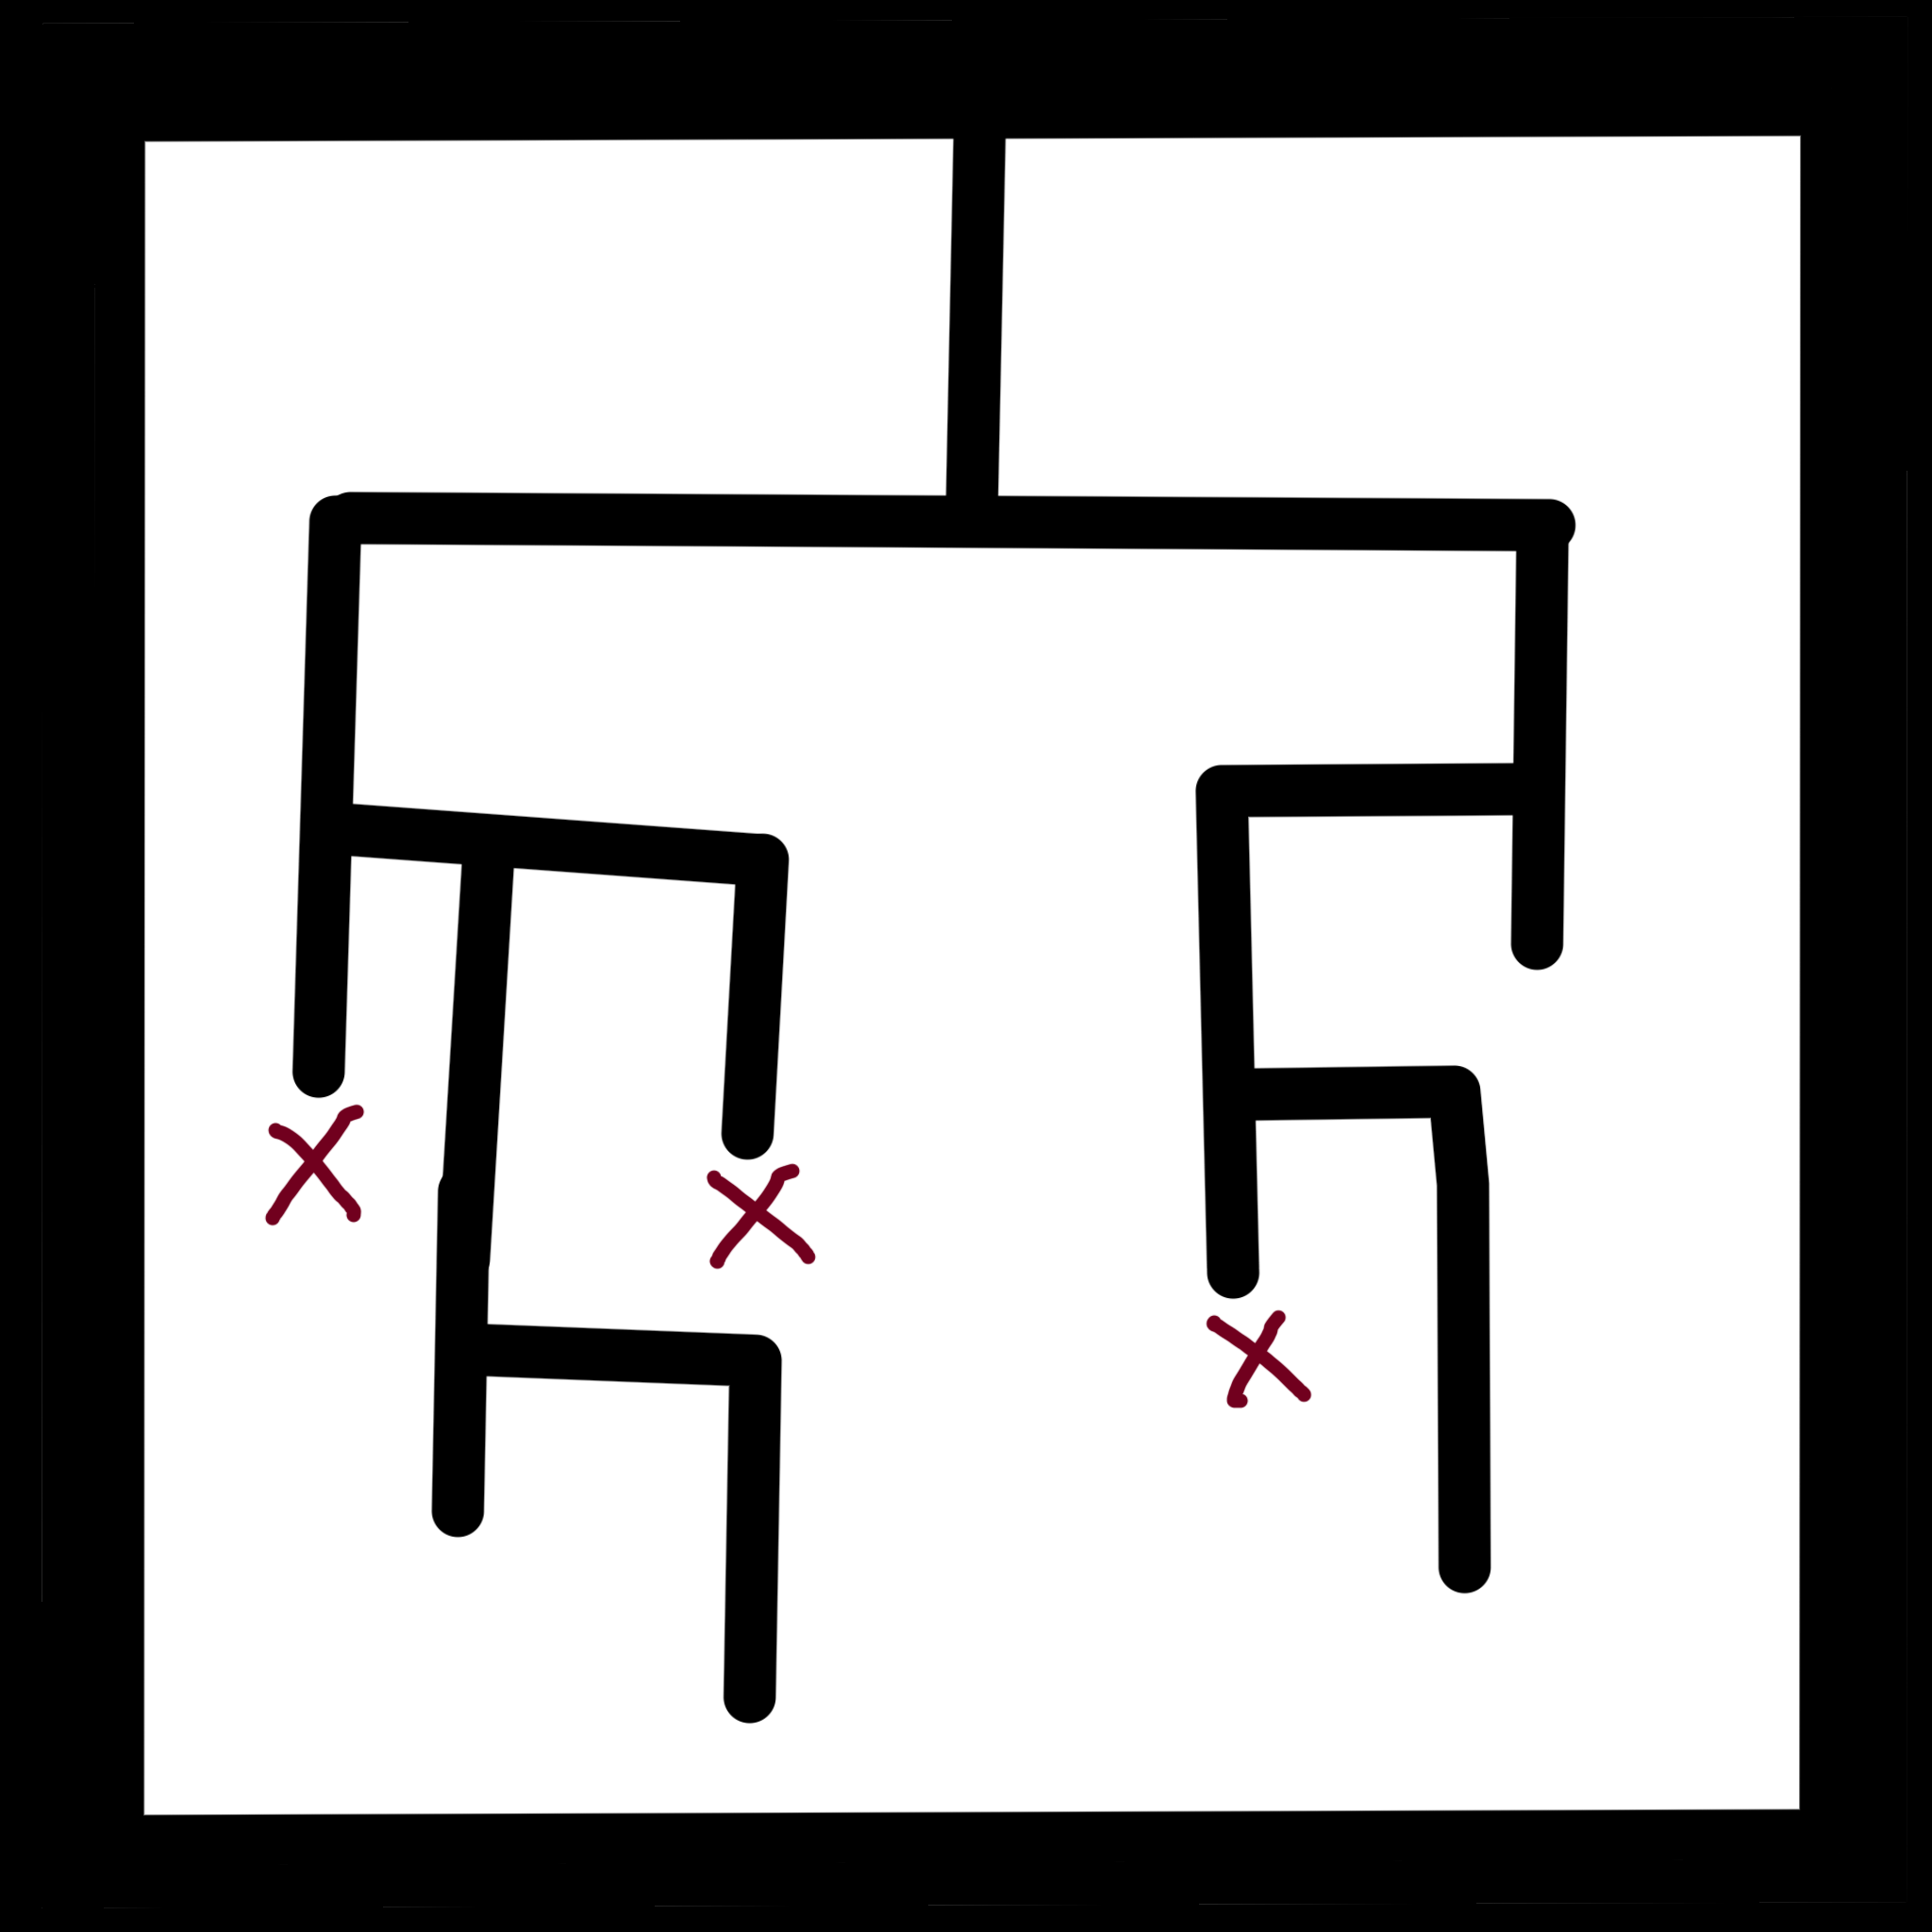  A black square with a drawing of a phylogenetic tree in it Some of the branches of it end in a red X